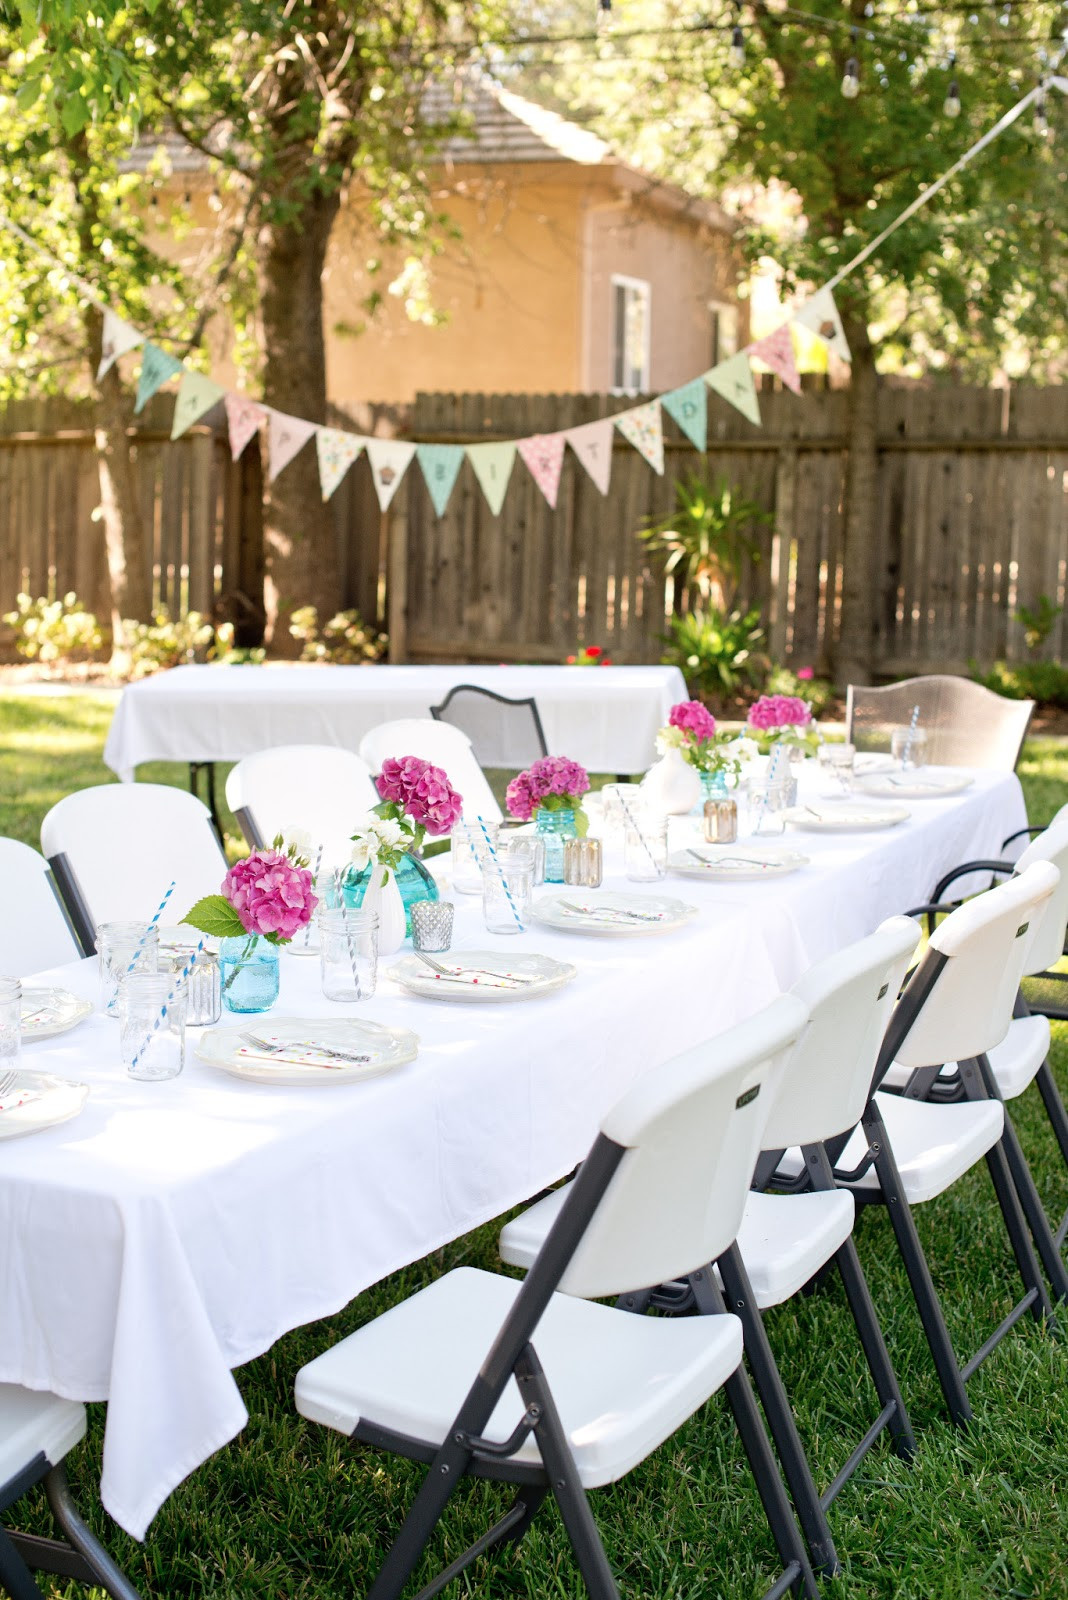 Backyard Party Ideas Pinterest
 Backyard Party Decorations For Unfor table Moments